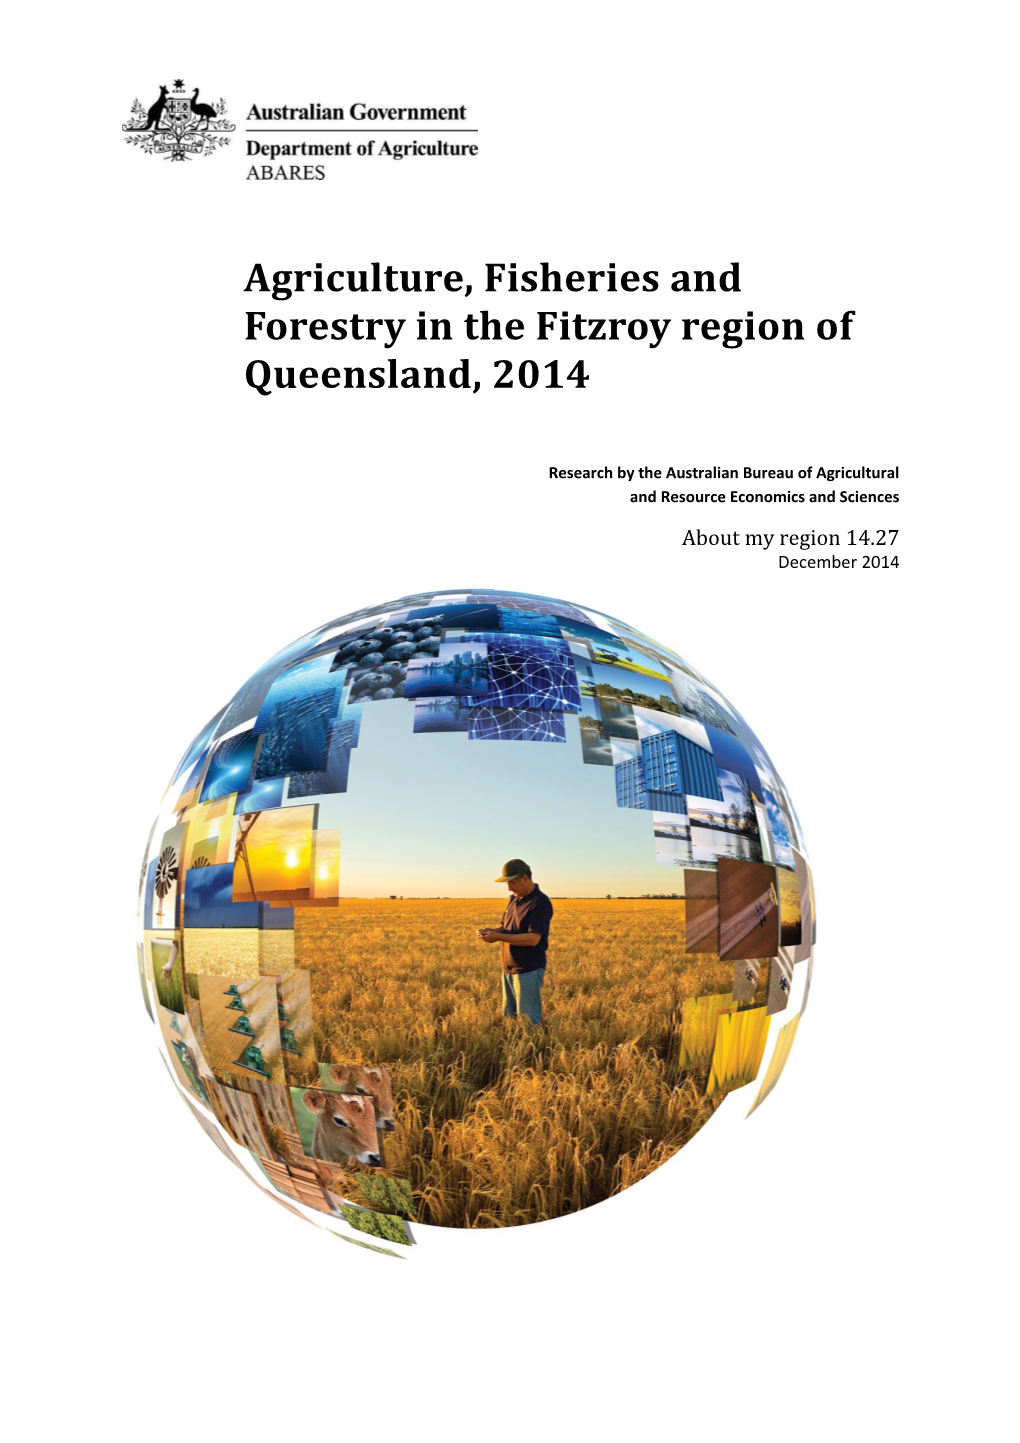 Agriculture, Fisheries and Forestry in the Fitzroy Region of Queensland, 2014